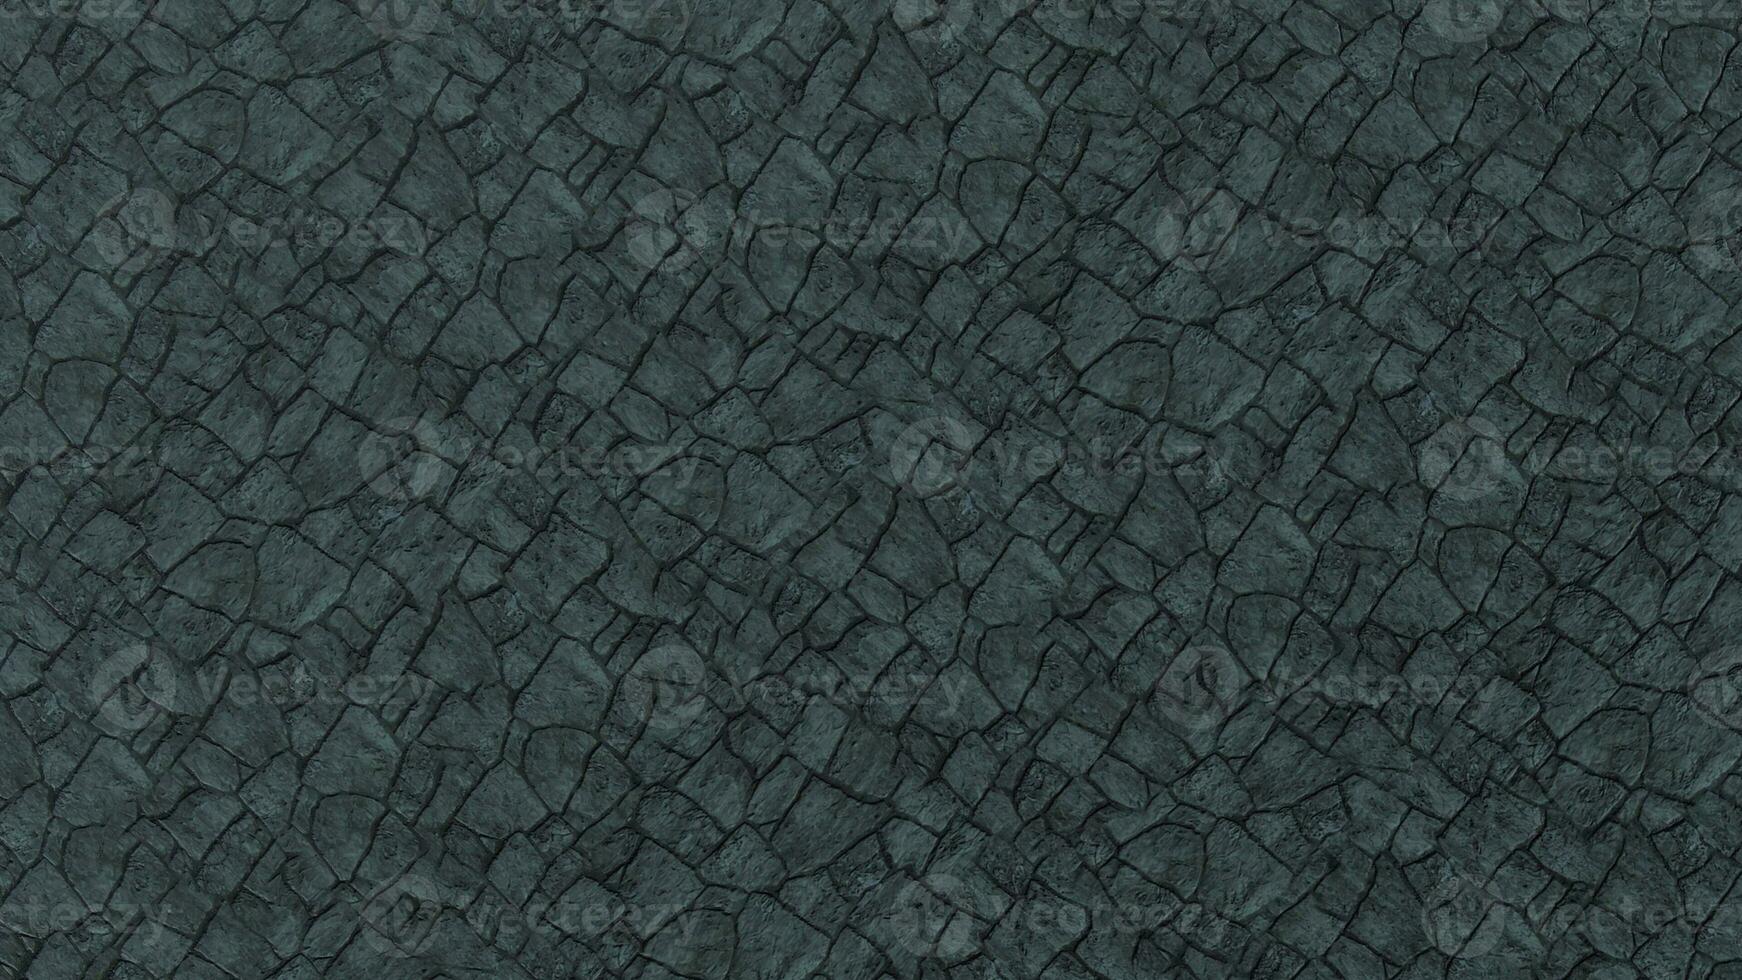 Stone texture green for background or cover photo